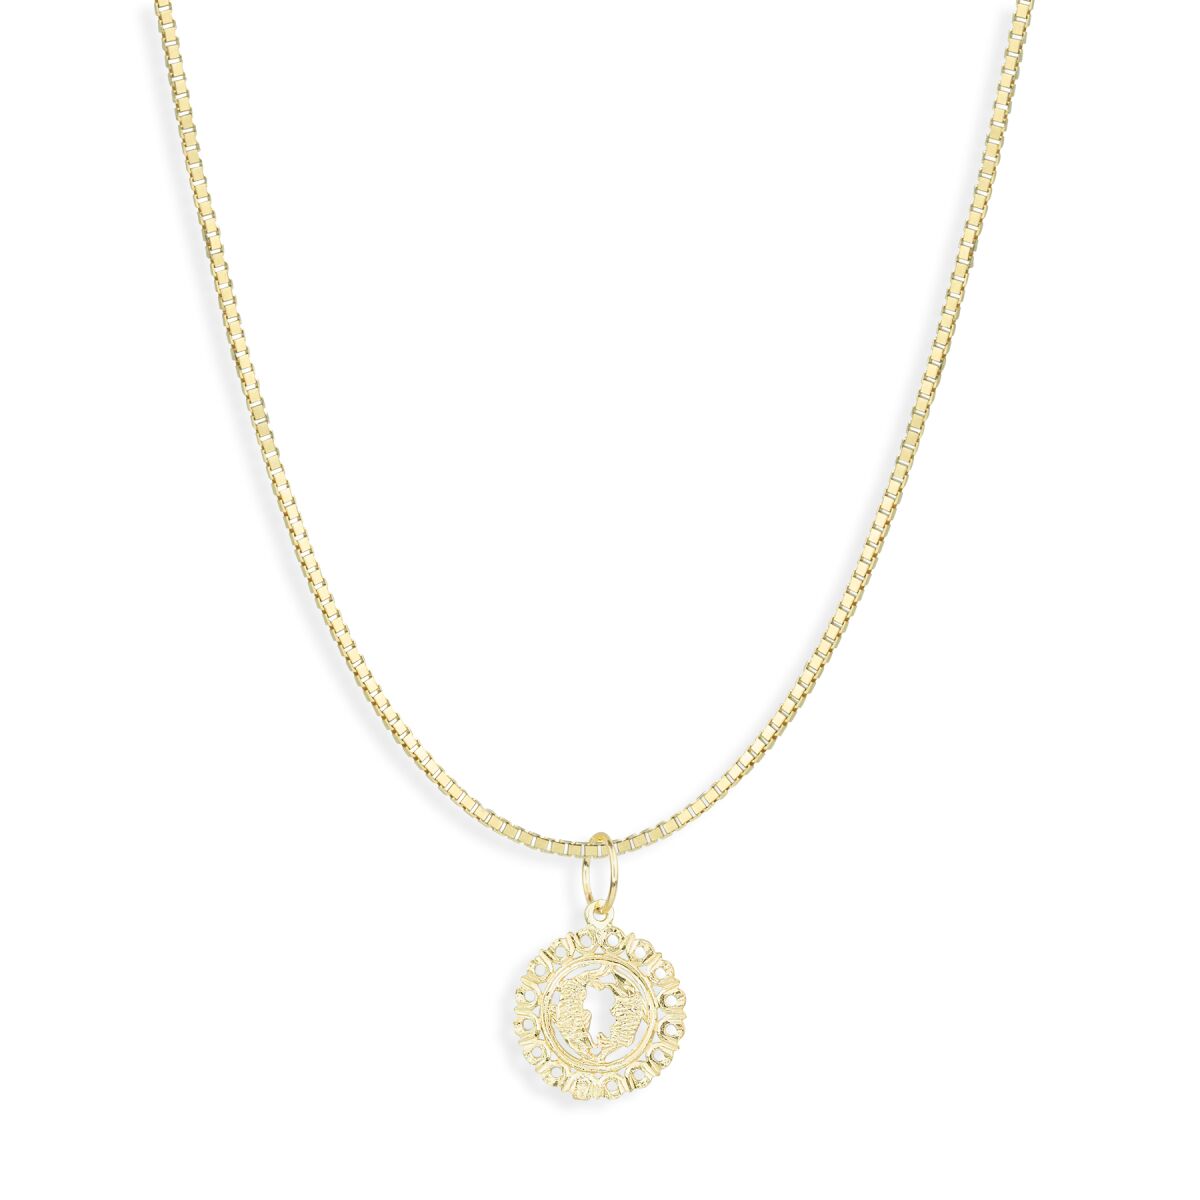 A yellow gold chain with a Pisces pendant